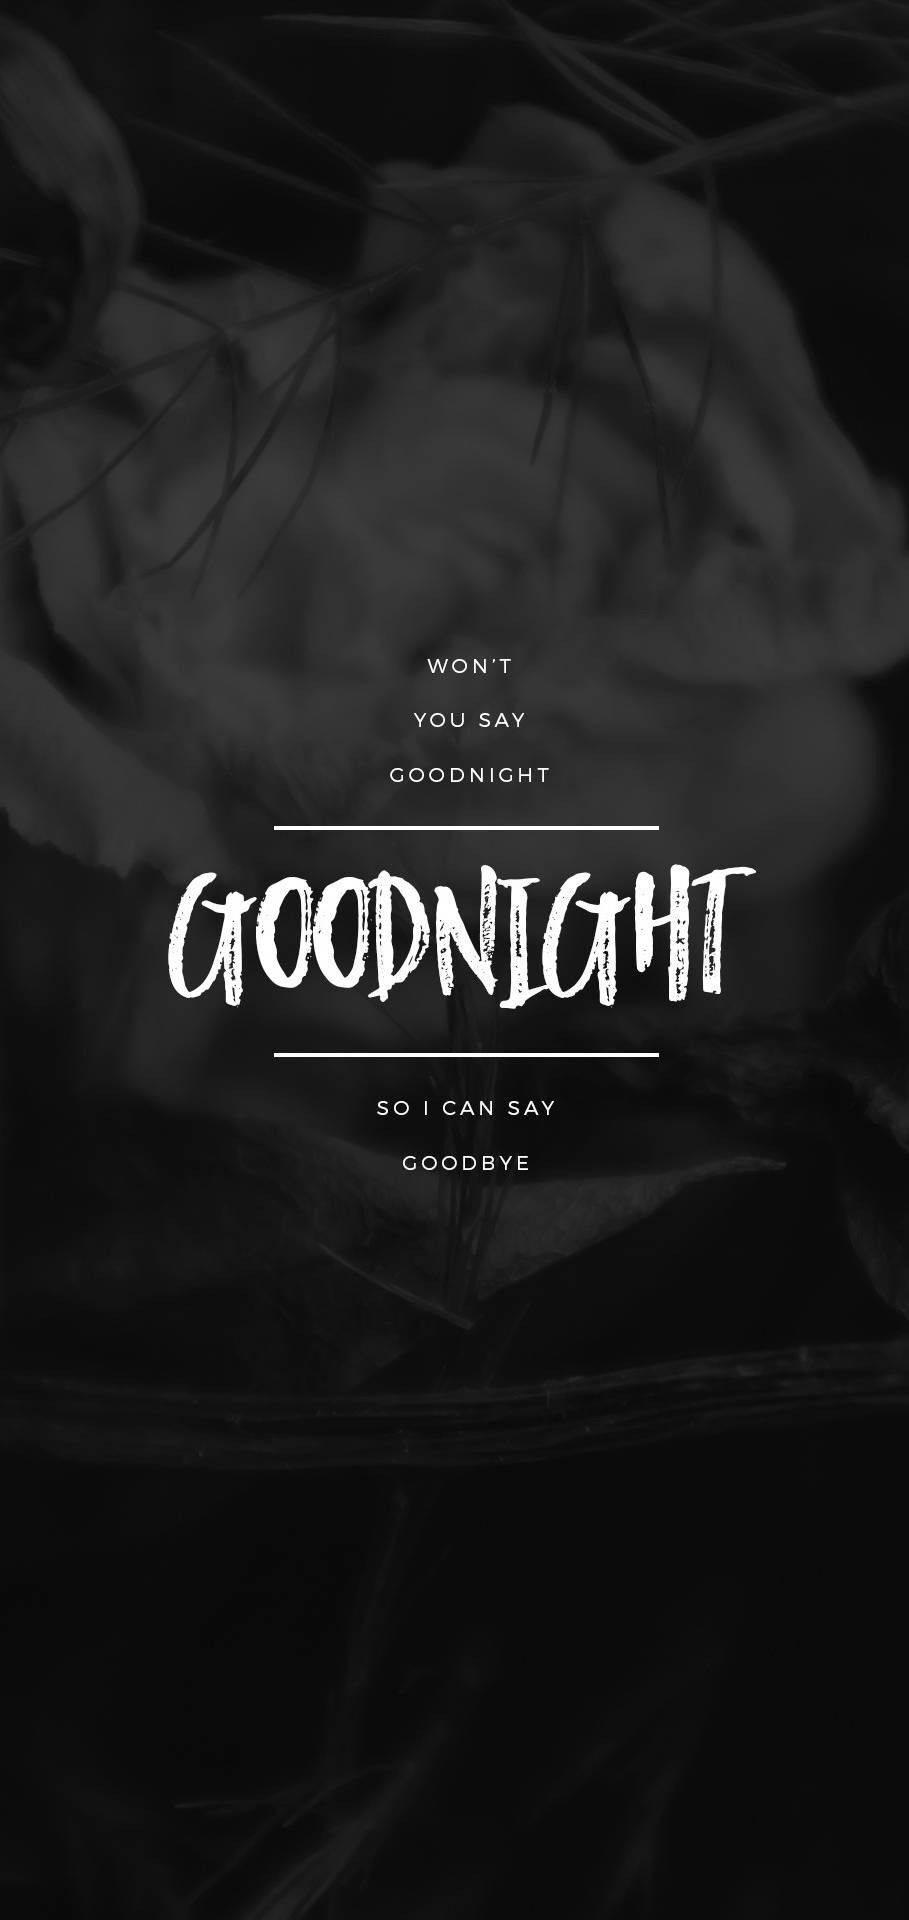 A dark and moody Goodnight wallpaper with a wish that your partner will say Goodnight instead of Goodbye. - Night